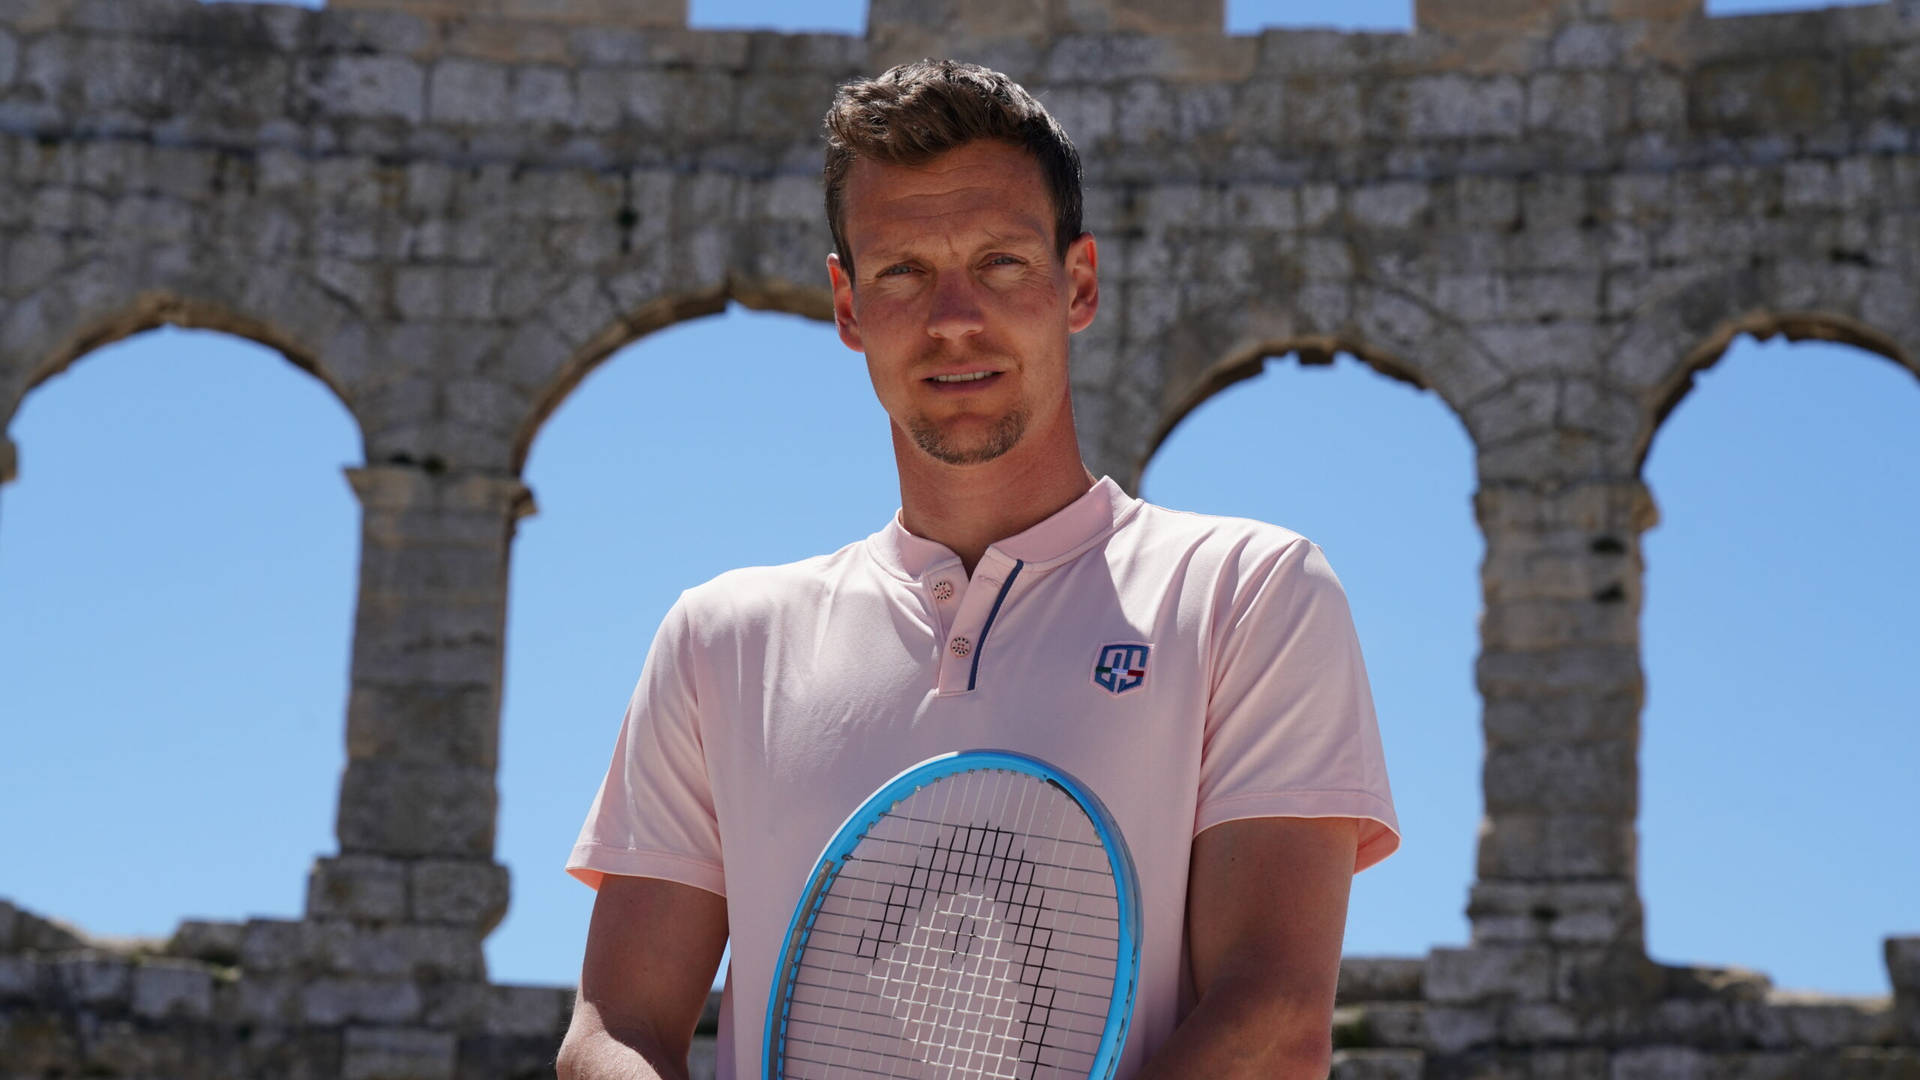 Tennis star Tomas Berdych against an old stone wall backdrop. Wallpaper